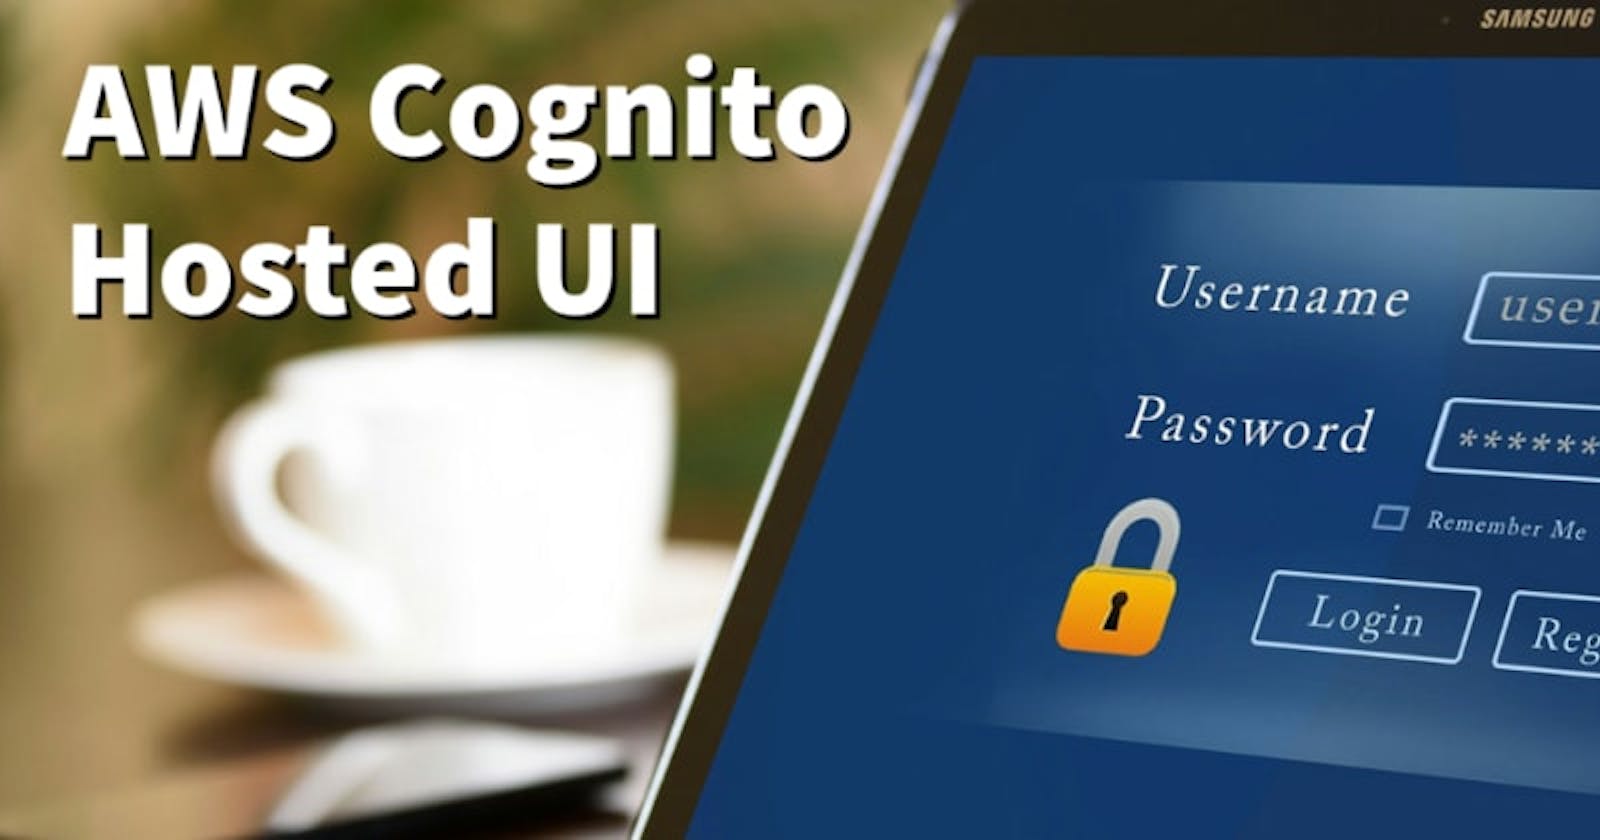 AWS Cognito Hosted UI